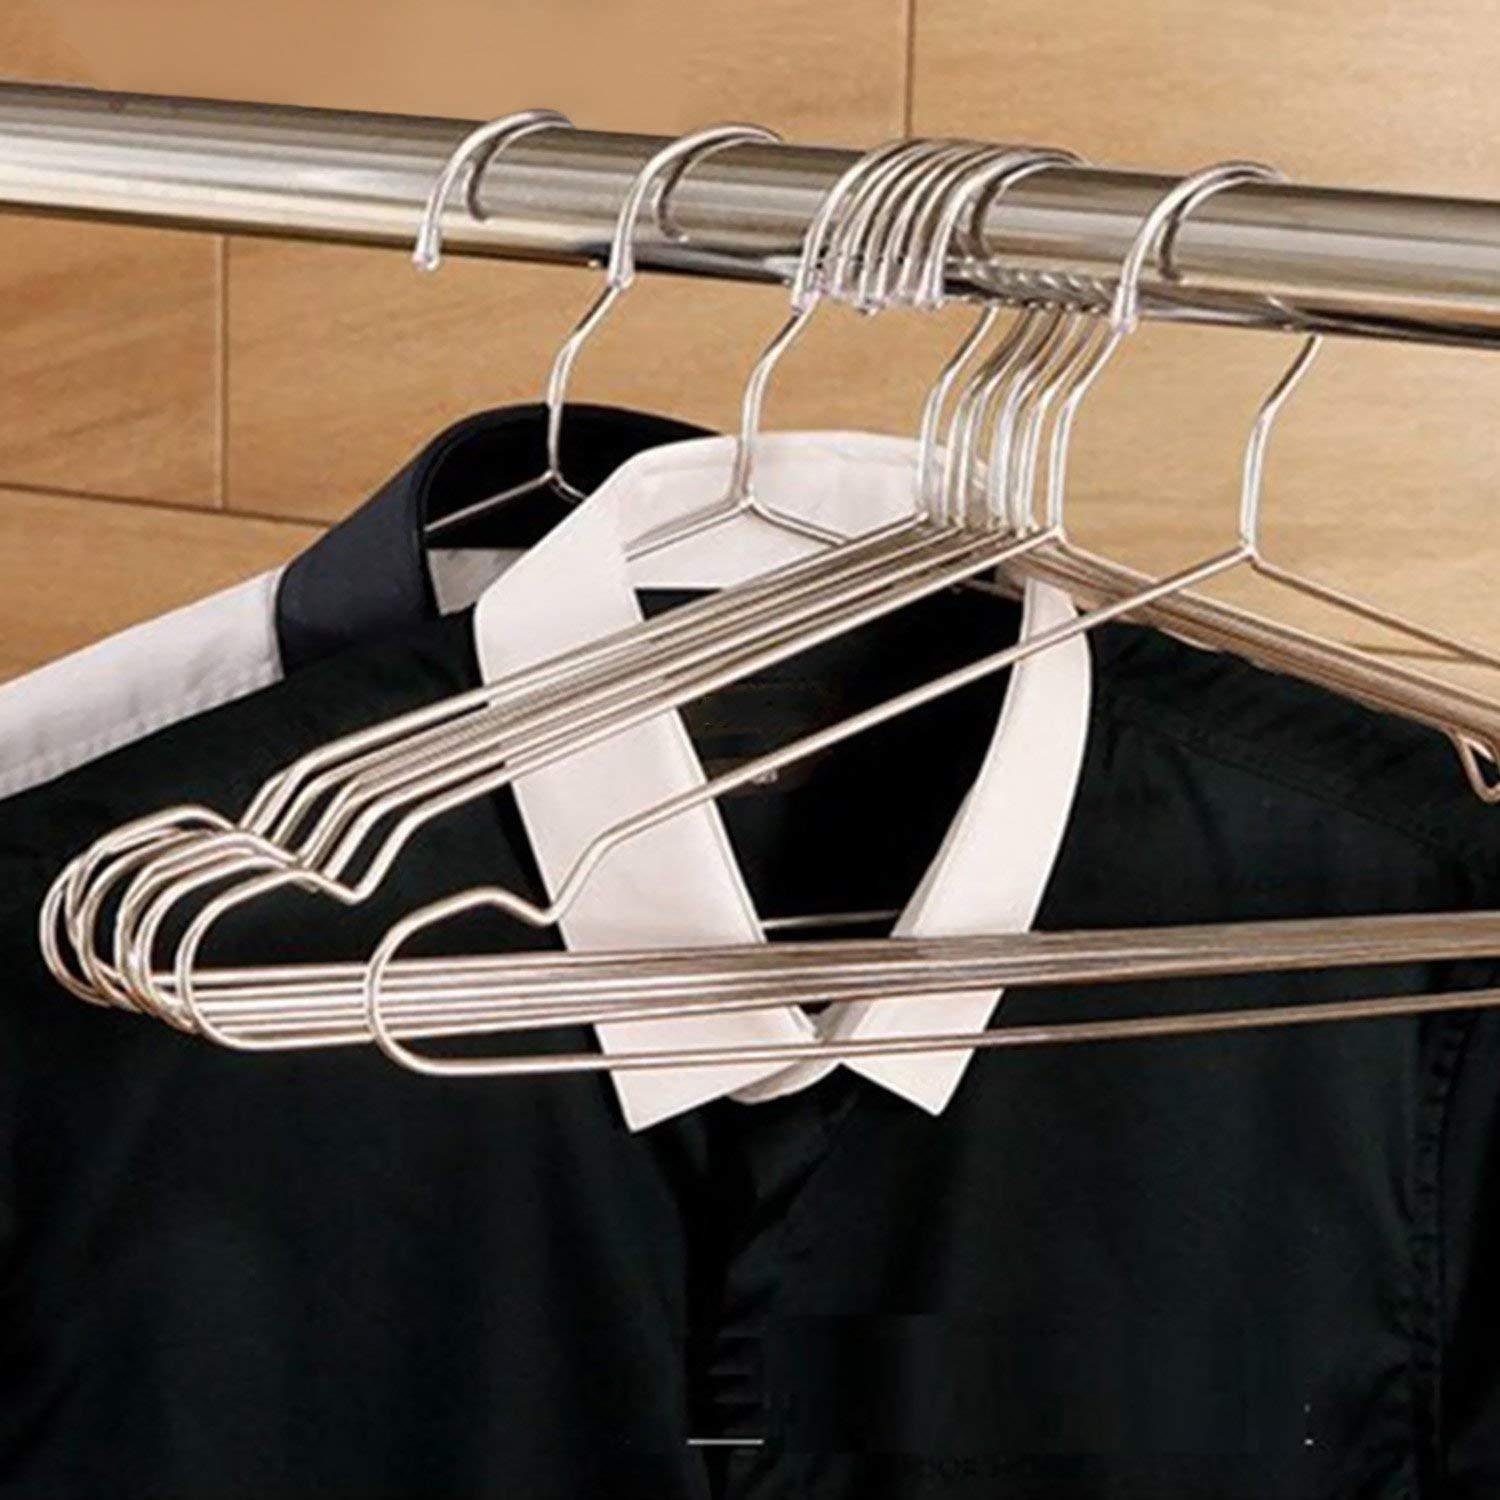 TUXWANG Metal Hangers, 40 Pack Stainless Steel Strong Wire Clothes Hangers-16.5 Inch, Silvery